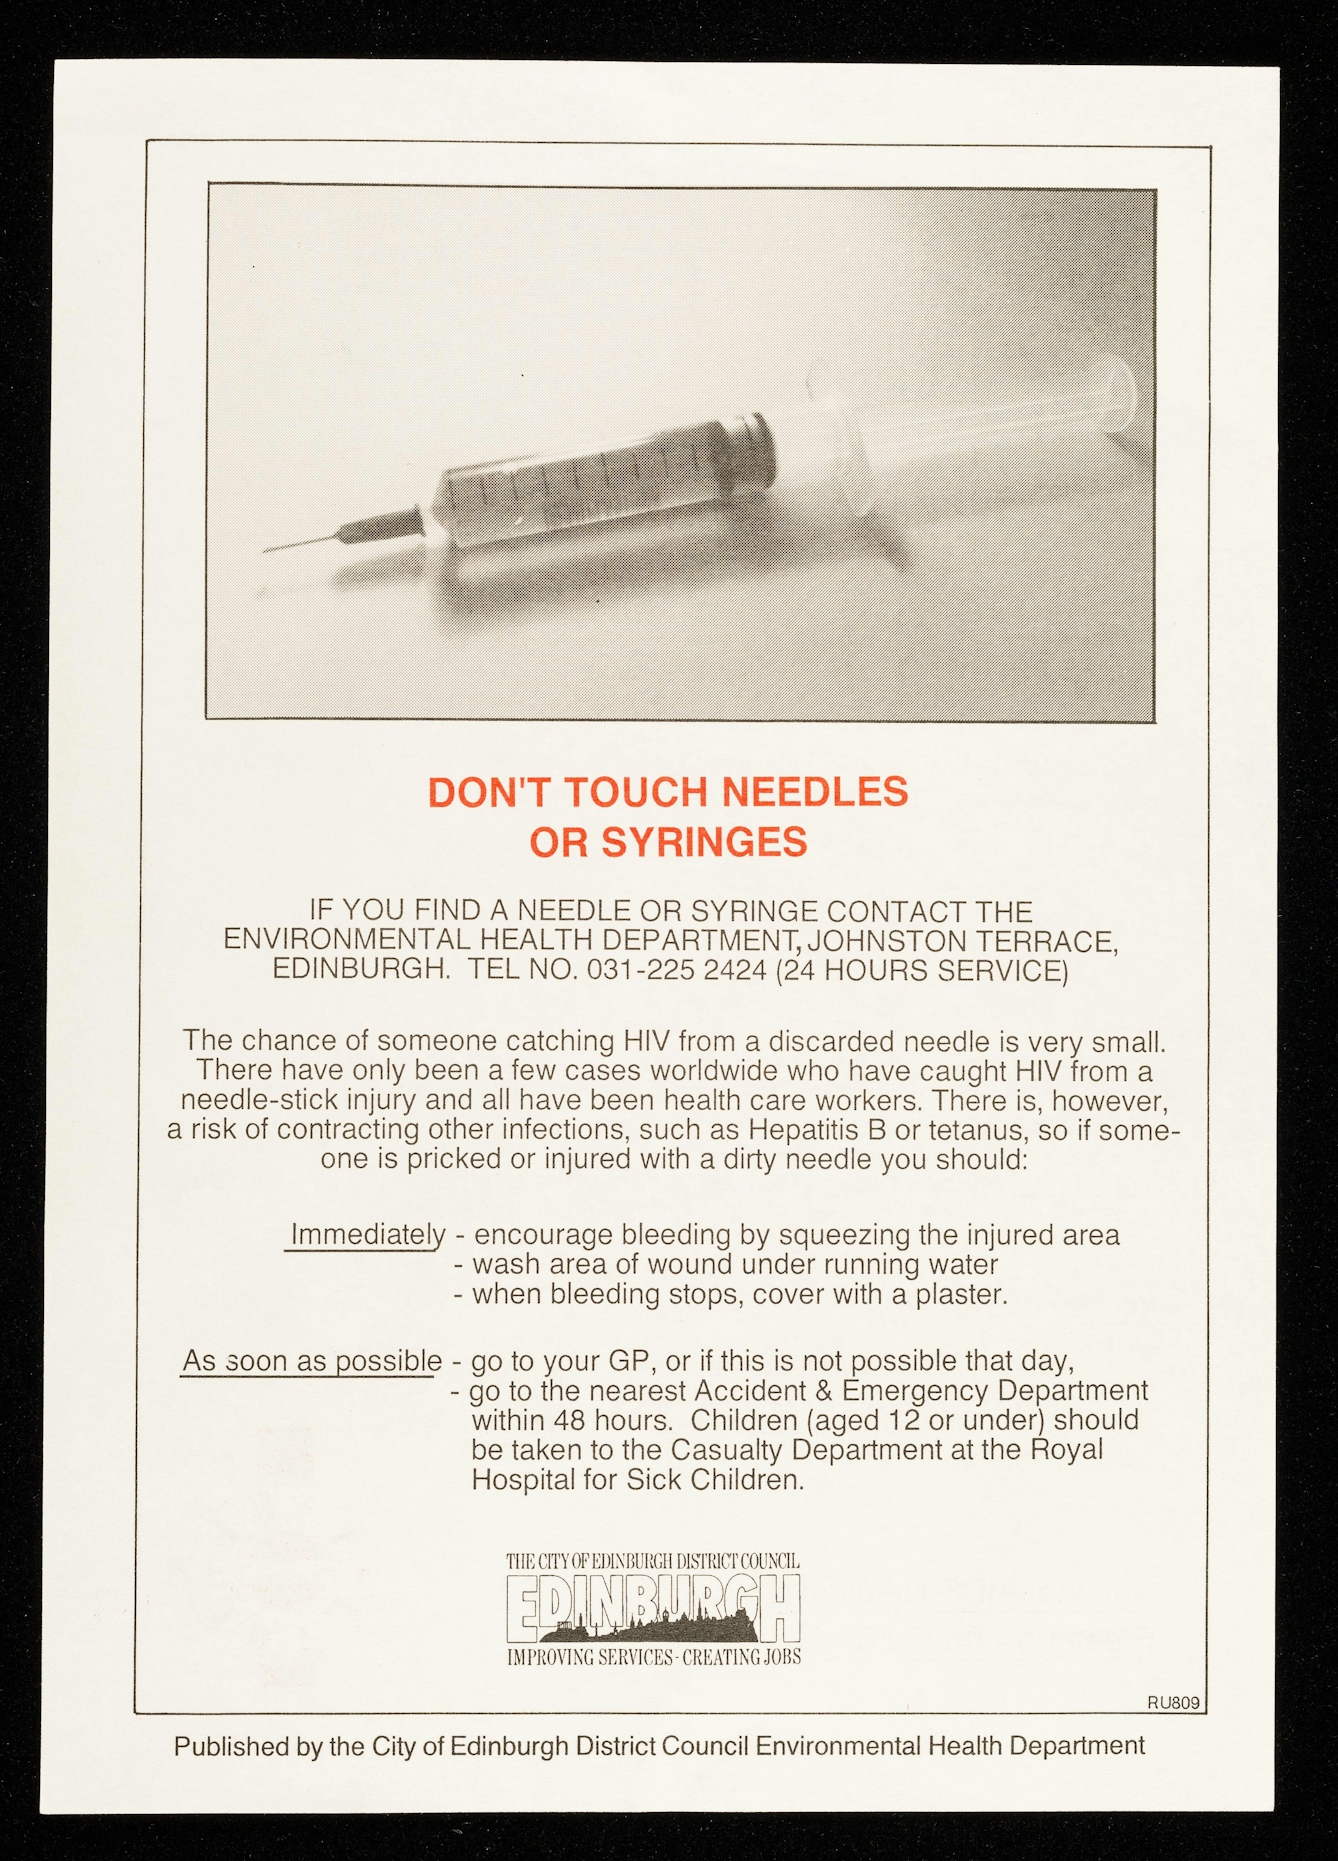 Poster with a large greyscale image of a syringe at the top and orange capitalised text saying "Don't touch needles or syringes". The black text below gives advice on what to do immediately and then as soon as possible. The City of Edinburgh District Council logo is at the bottom centre.